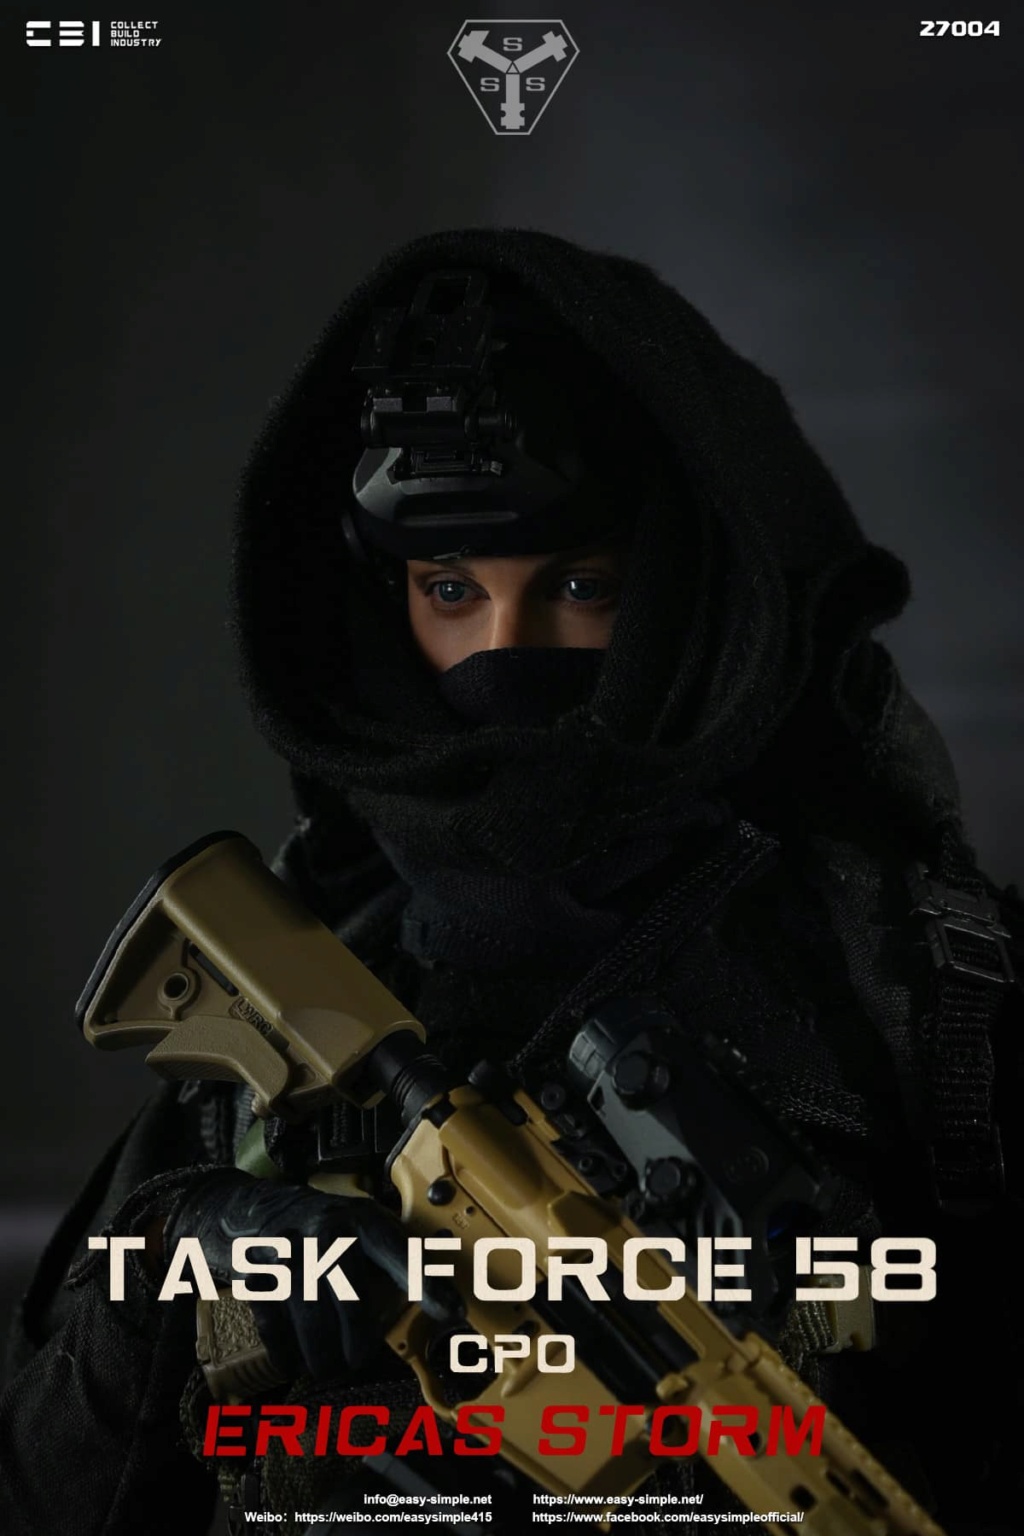 female - NEW PRODUCT: CBI & Easy&Simple: 27004 1/6 ERICA STORM - TASK FORCE 58 CPO action figure 18294